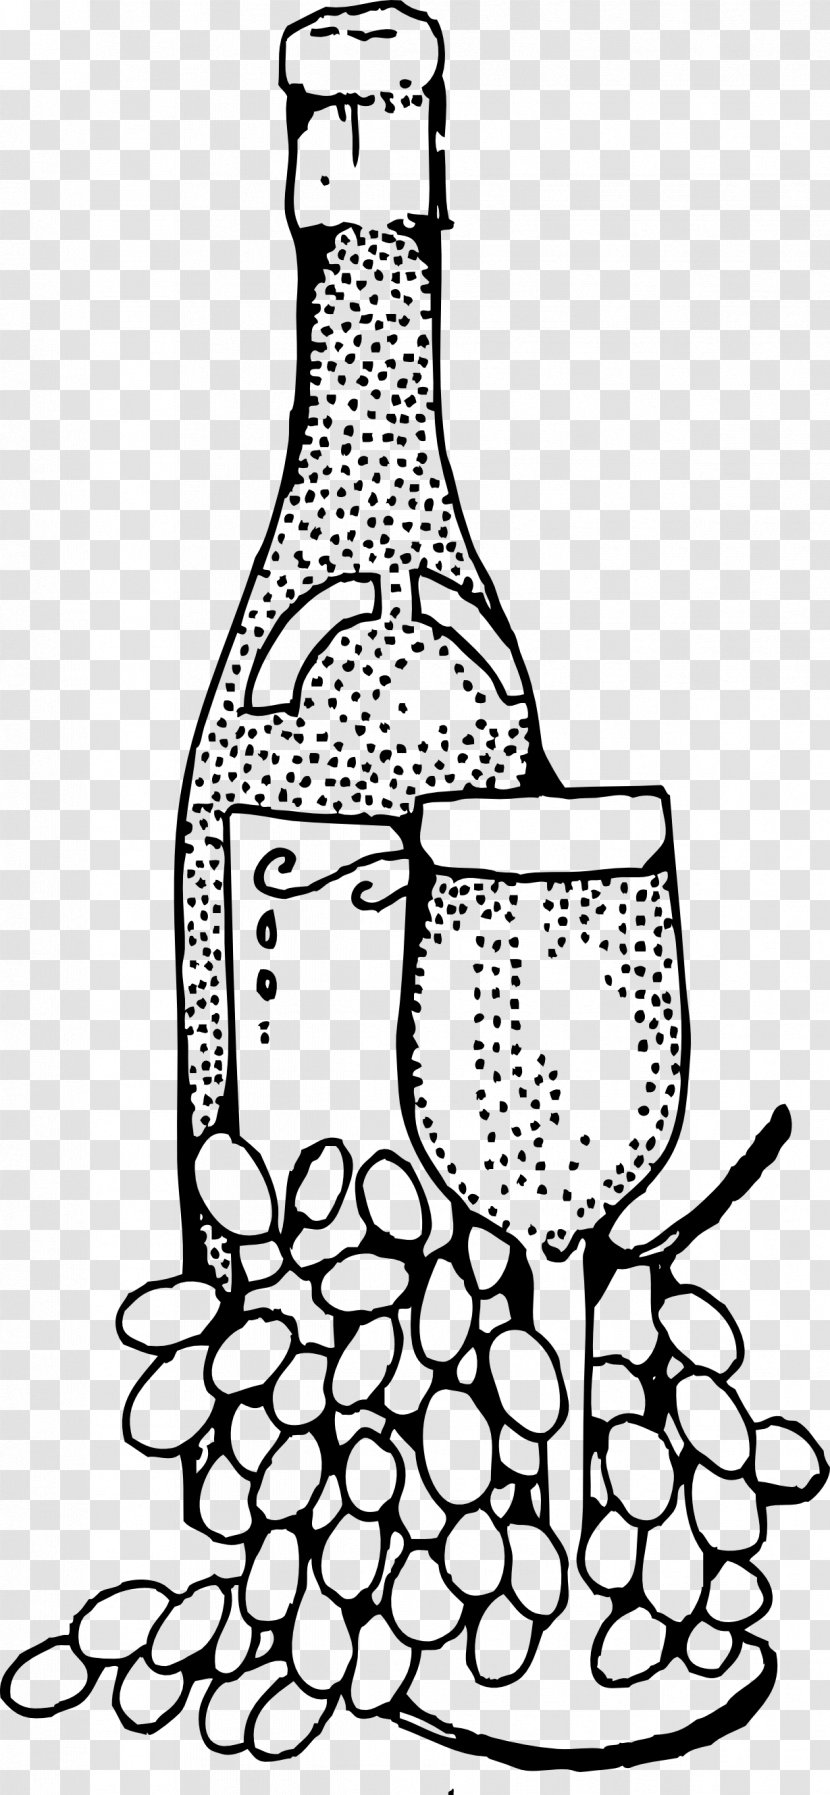 Wine Bottle Ready-to-Use Food And Drink Spot Illustrations Clip Art Transparent PNG